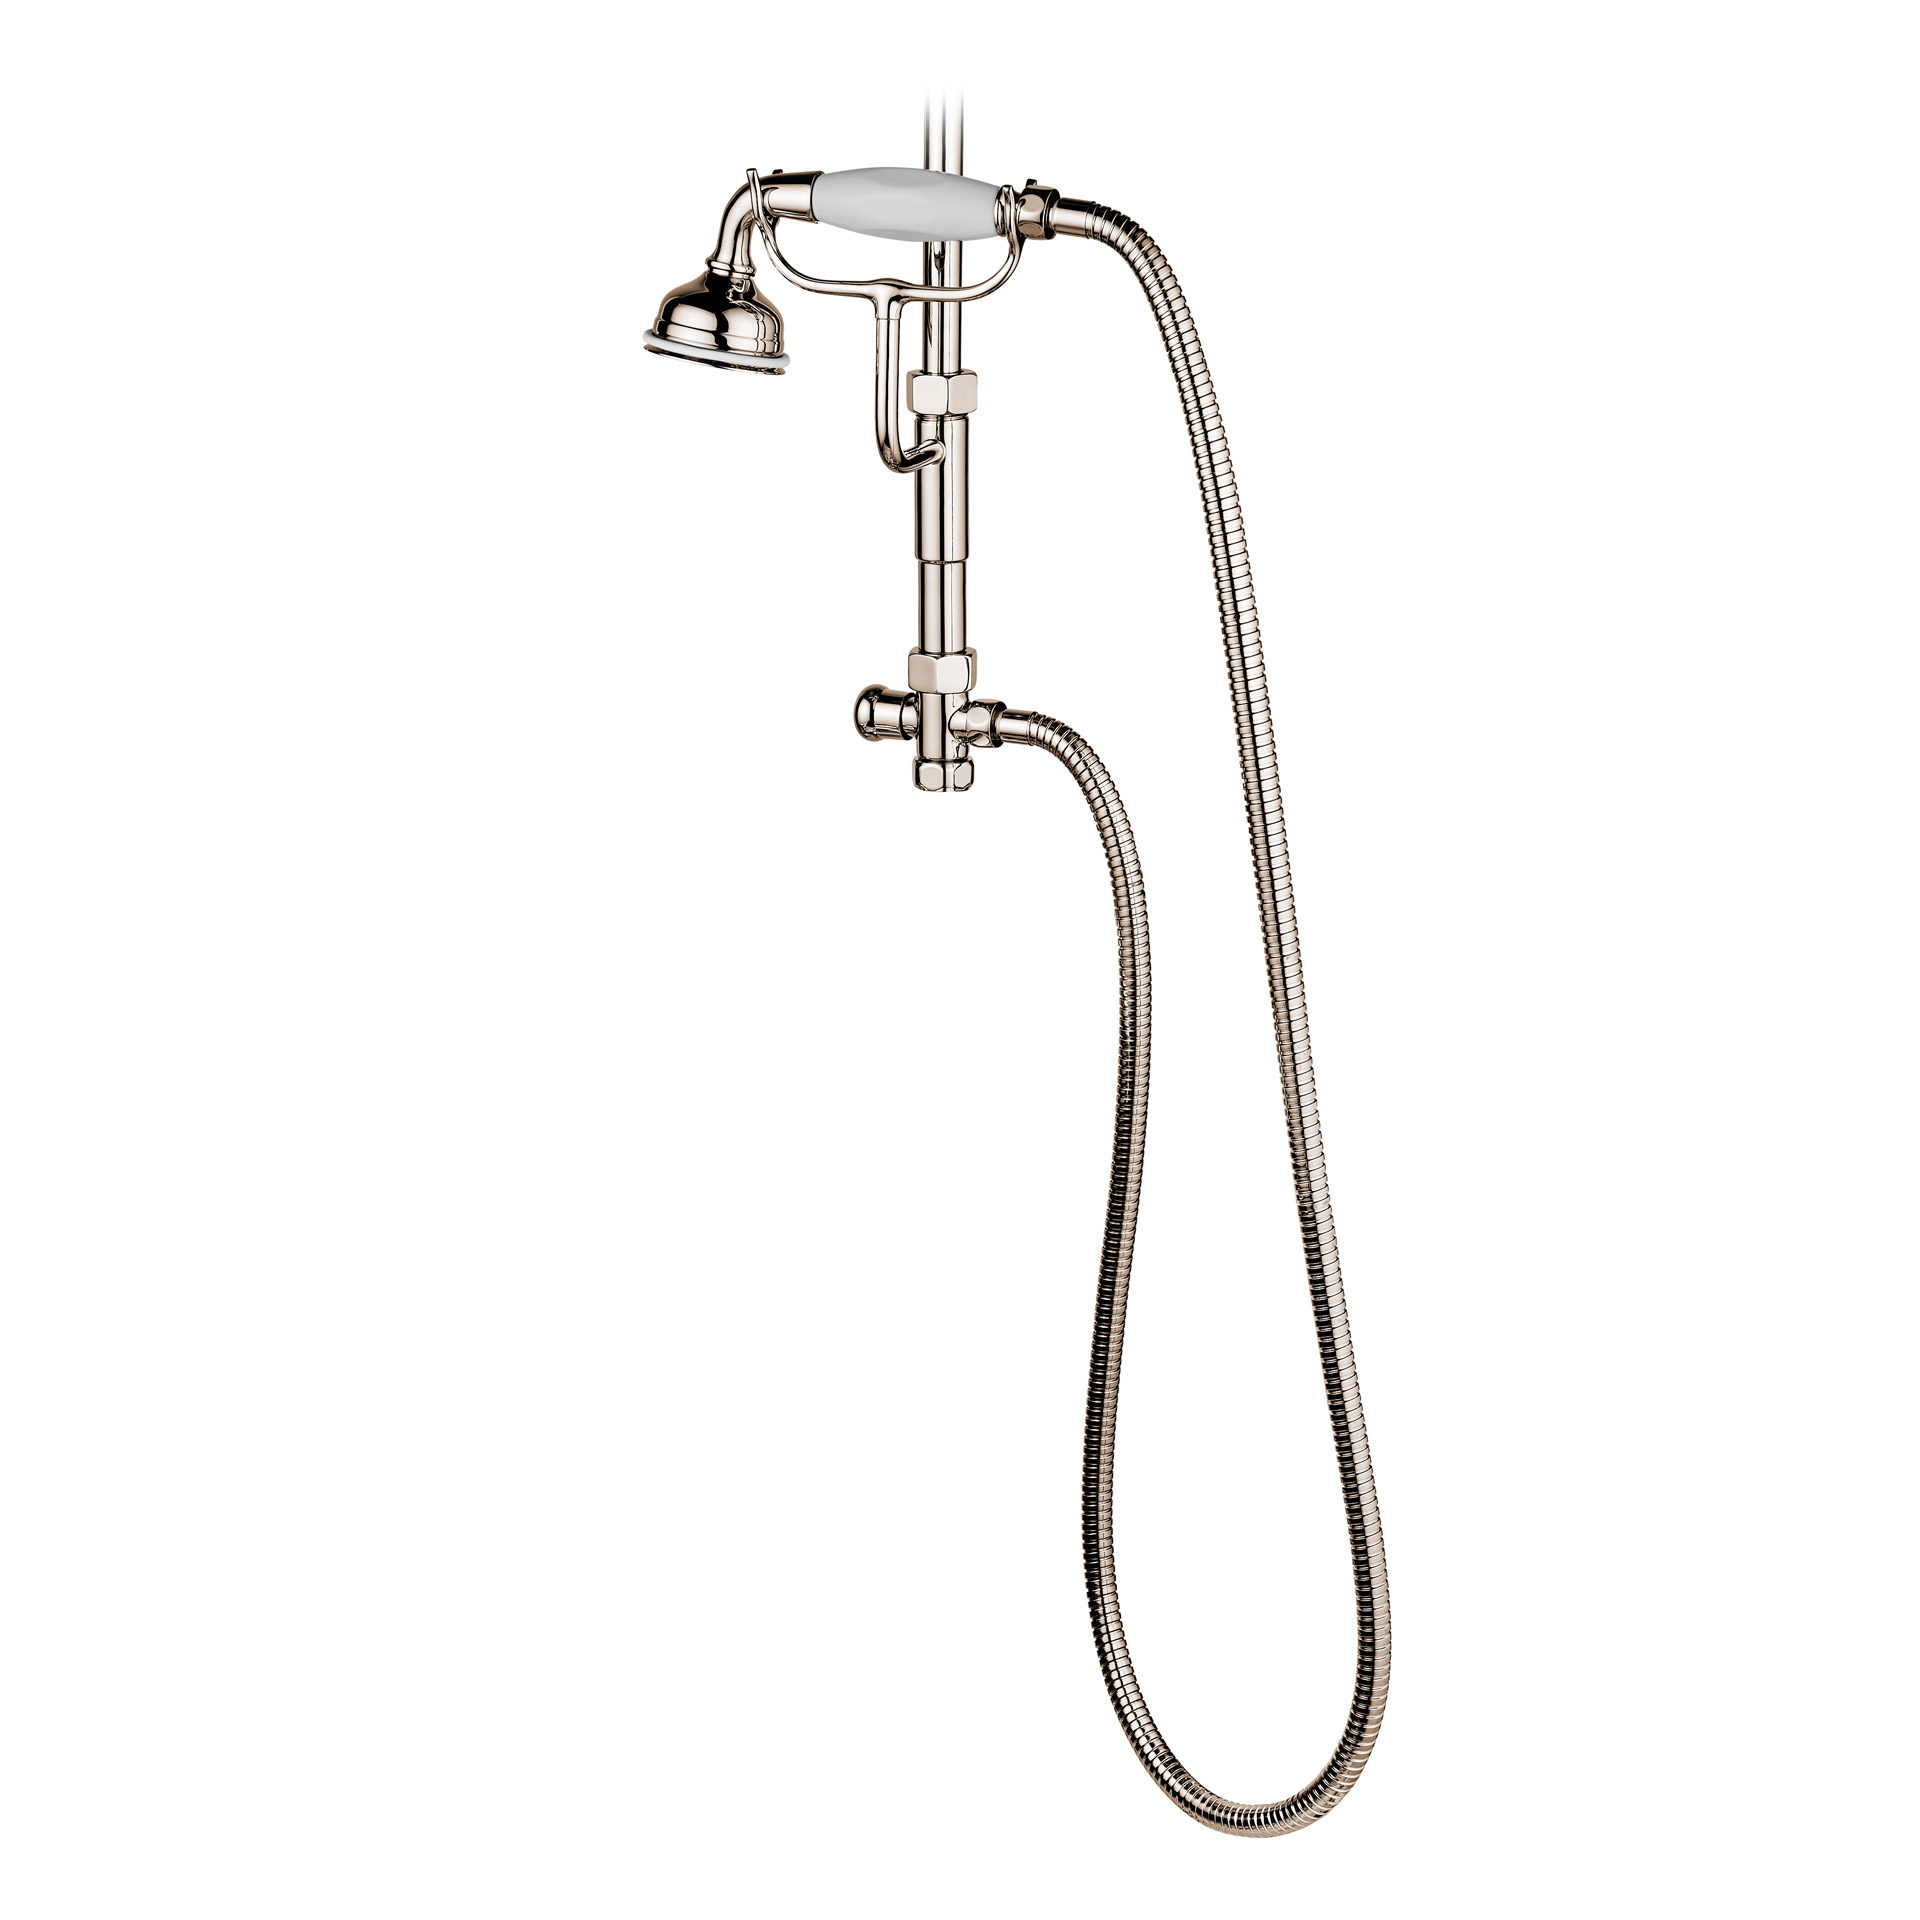 Shower with handspray, flexible hose and two-way diverter